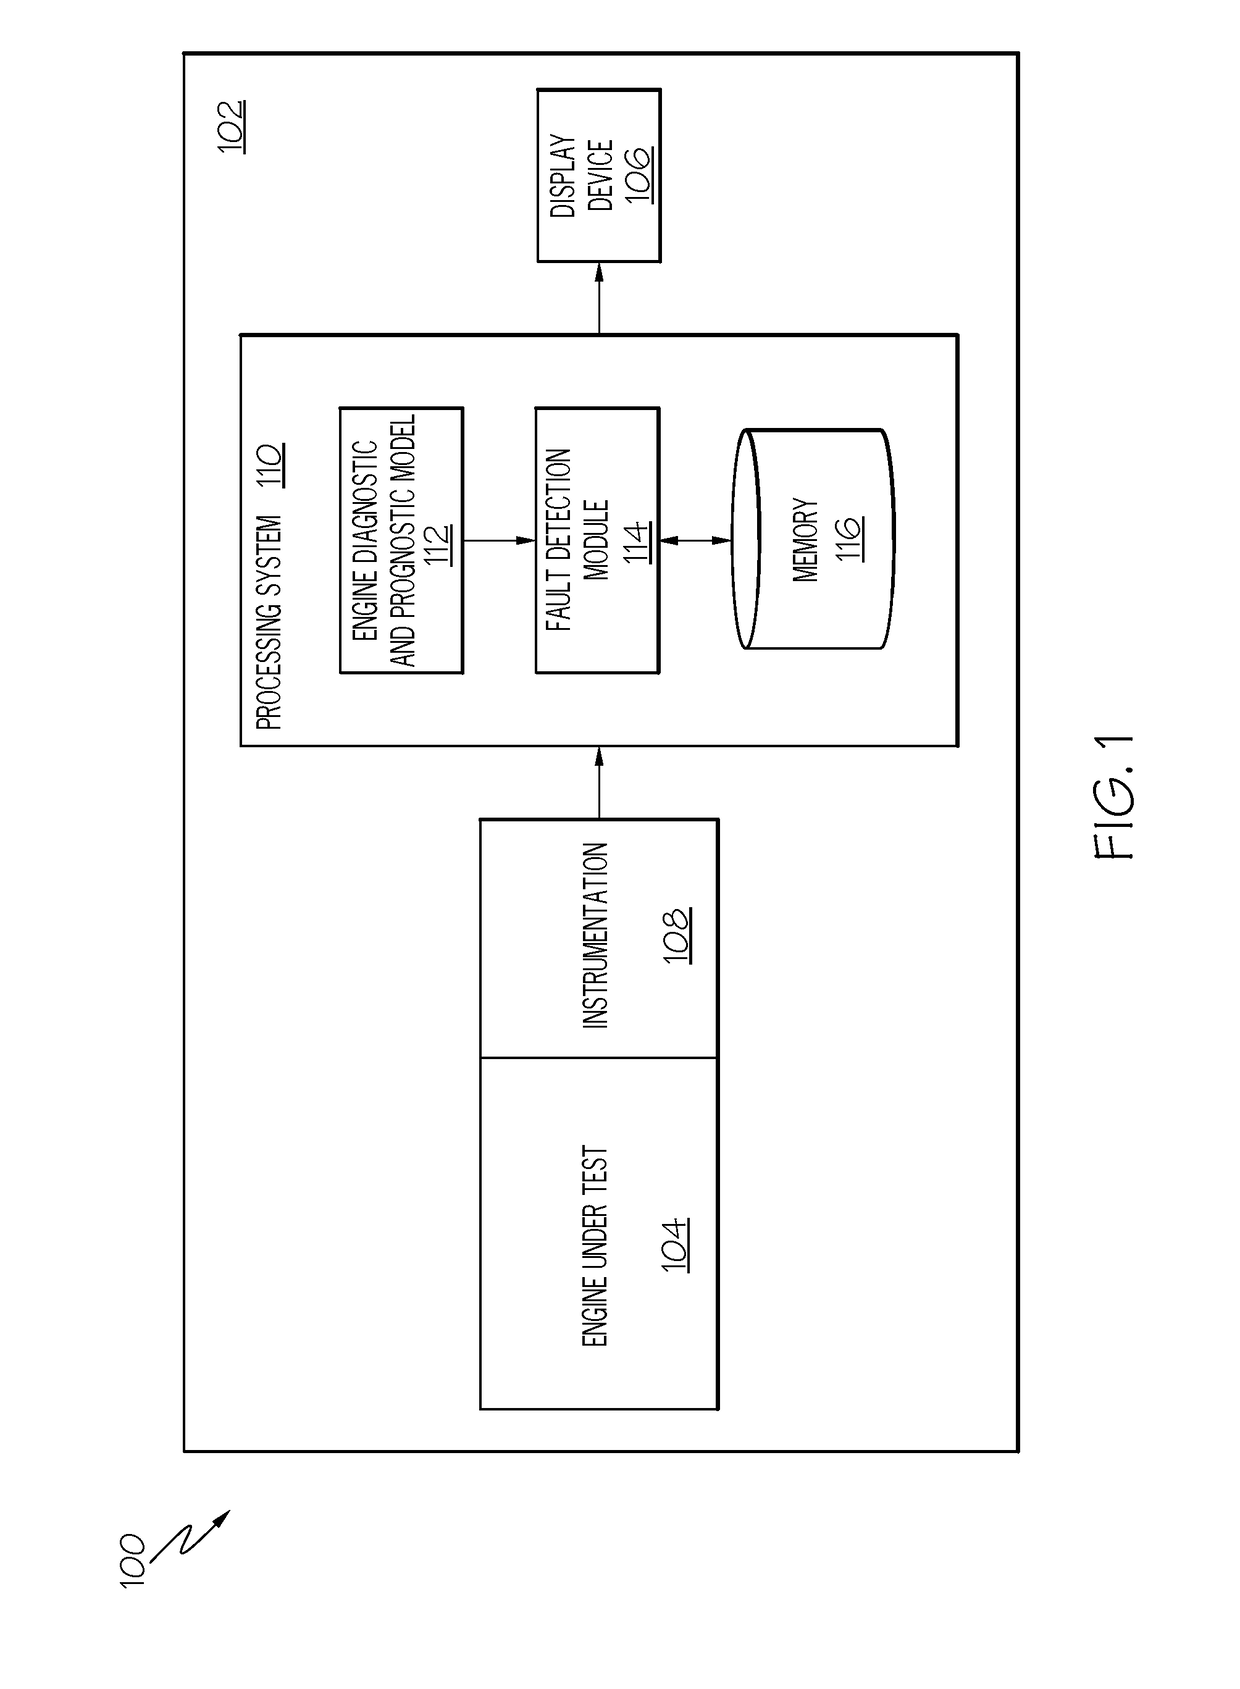 Gas turbine engine and test cell real-time diagnostic fault detection and corrective action system and method